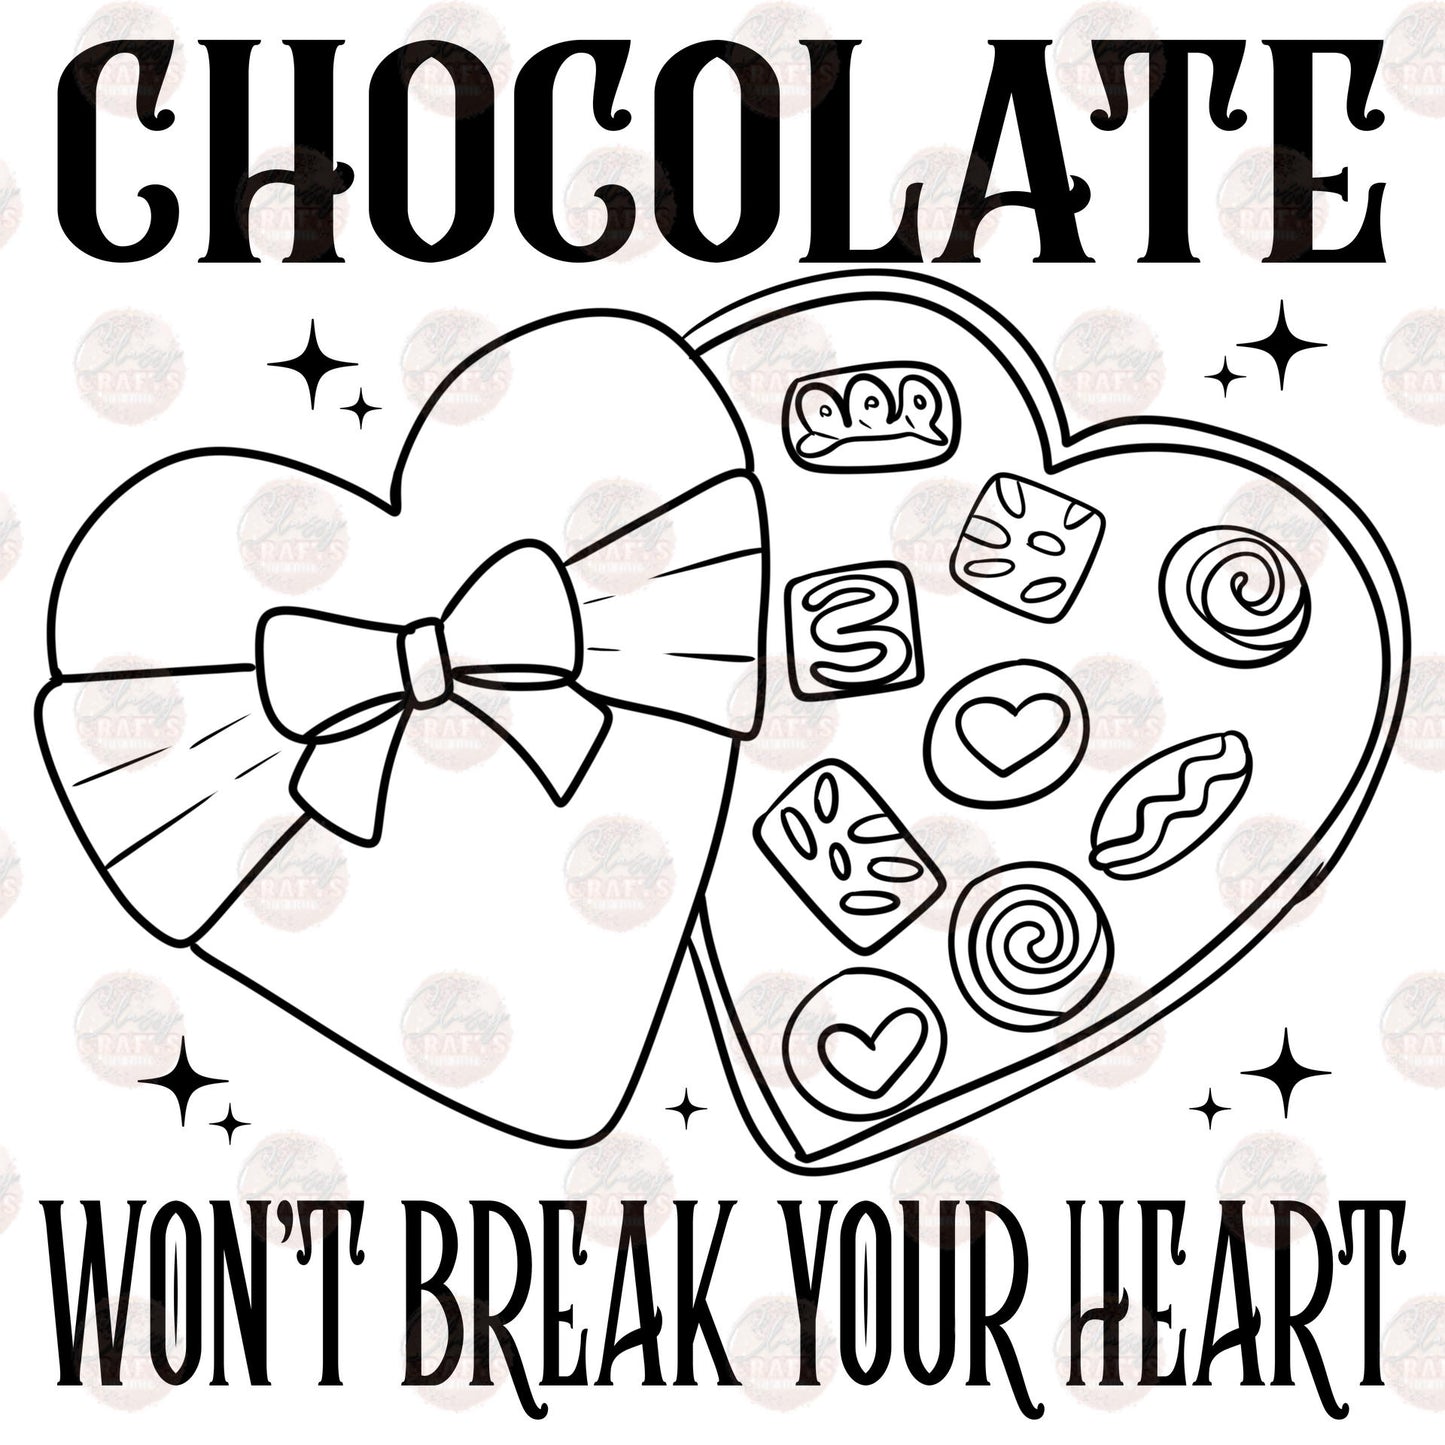 Chocolate Won't Break Your Heart - Sublimation Transfer